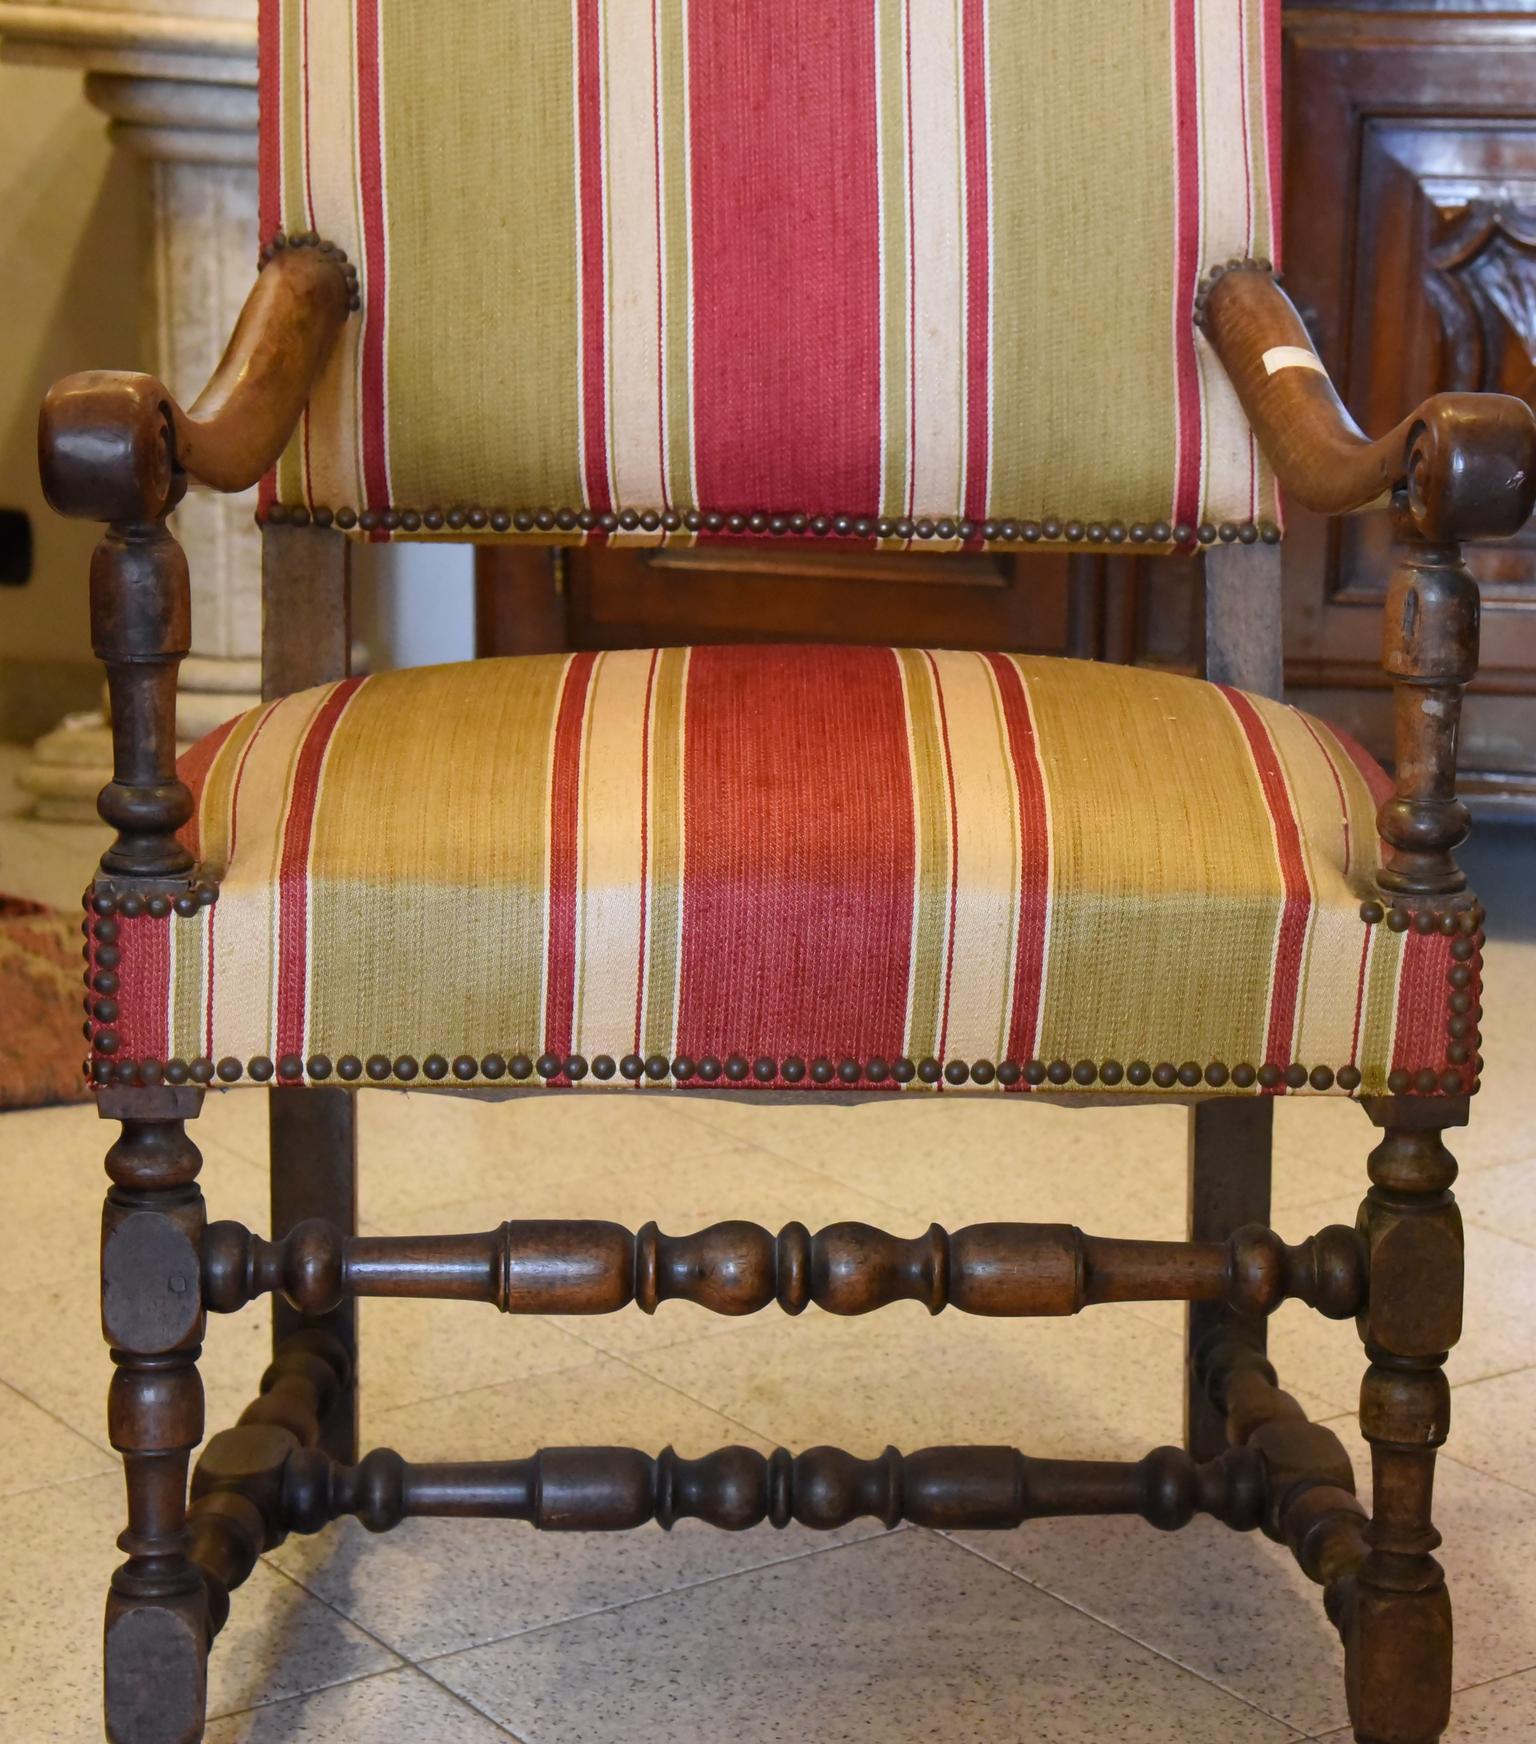 aRocchetto style armchair of the 600 style, made in the early 800s, in dark Walnut, with Studded spring Padding, elegant striped Fabric, wide and very comfortable seat.
Hand carved. Italy.